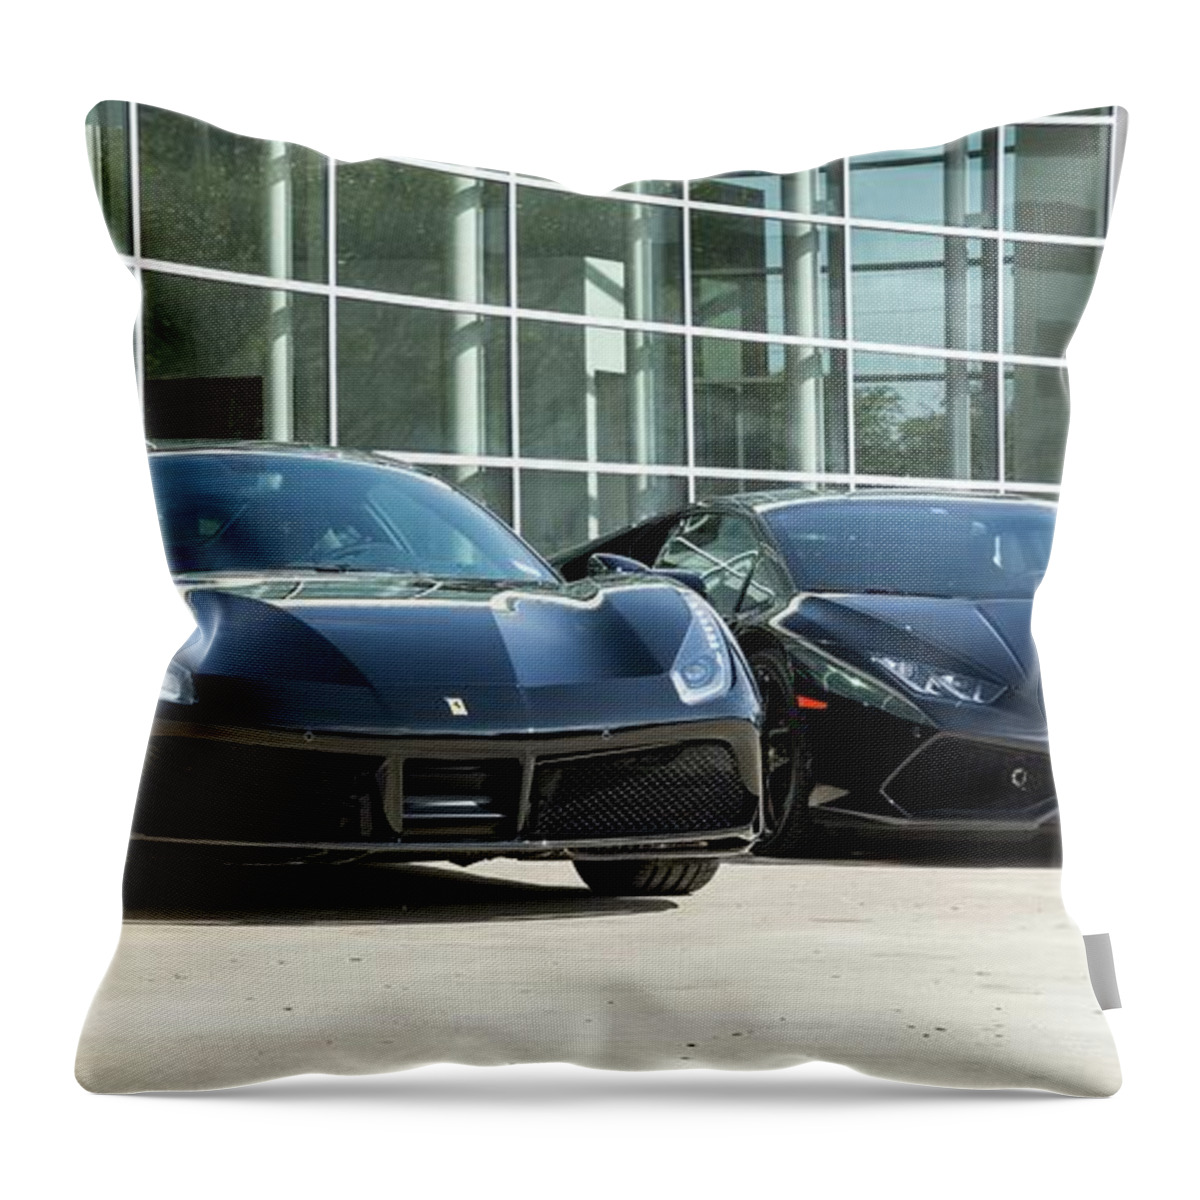  Throw Pillow featuring the photograph Italian Supercars by Rocco Silvestri